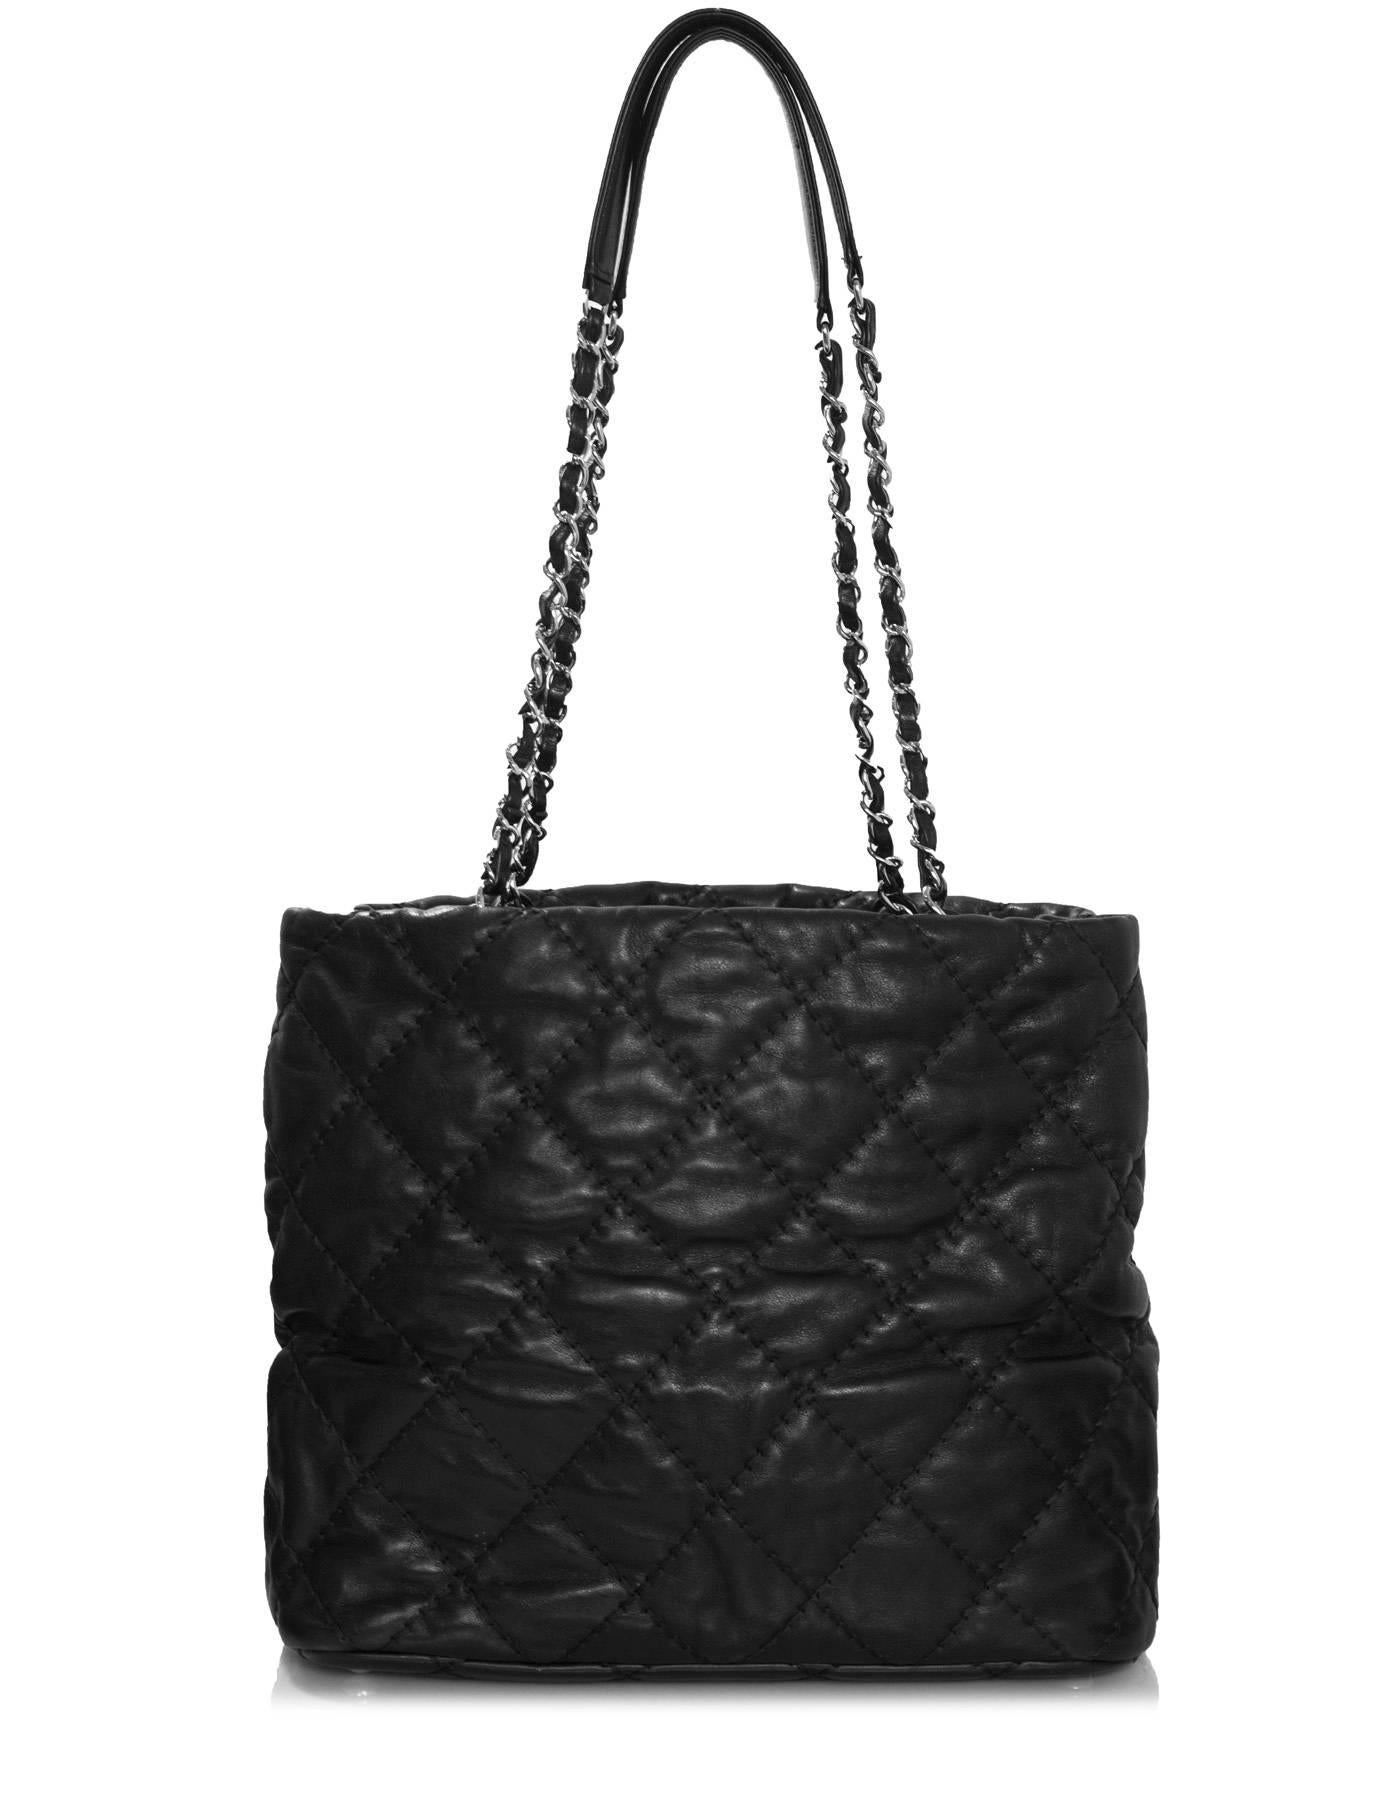 Women's Chanel Black Quilted Ultimate Stitch Tote Bag with DB